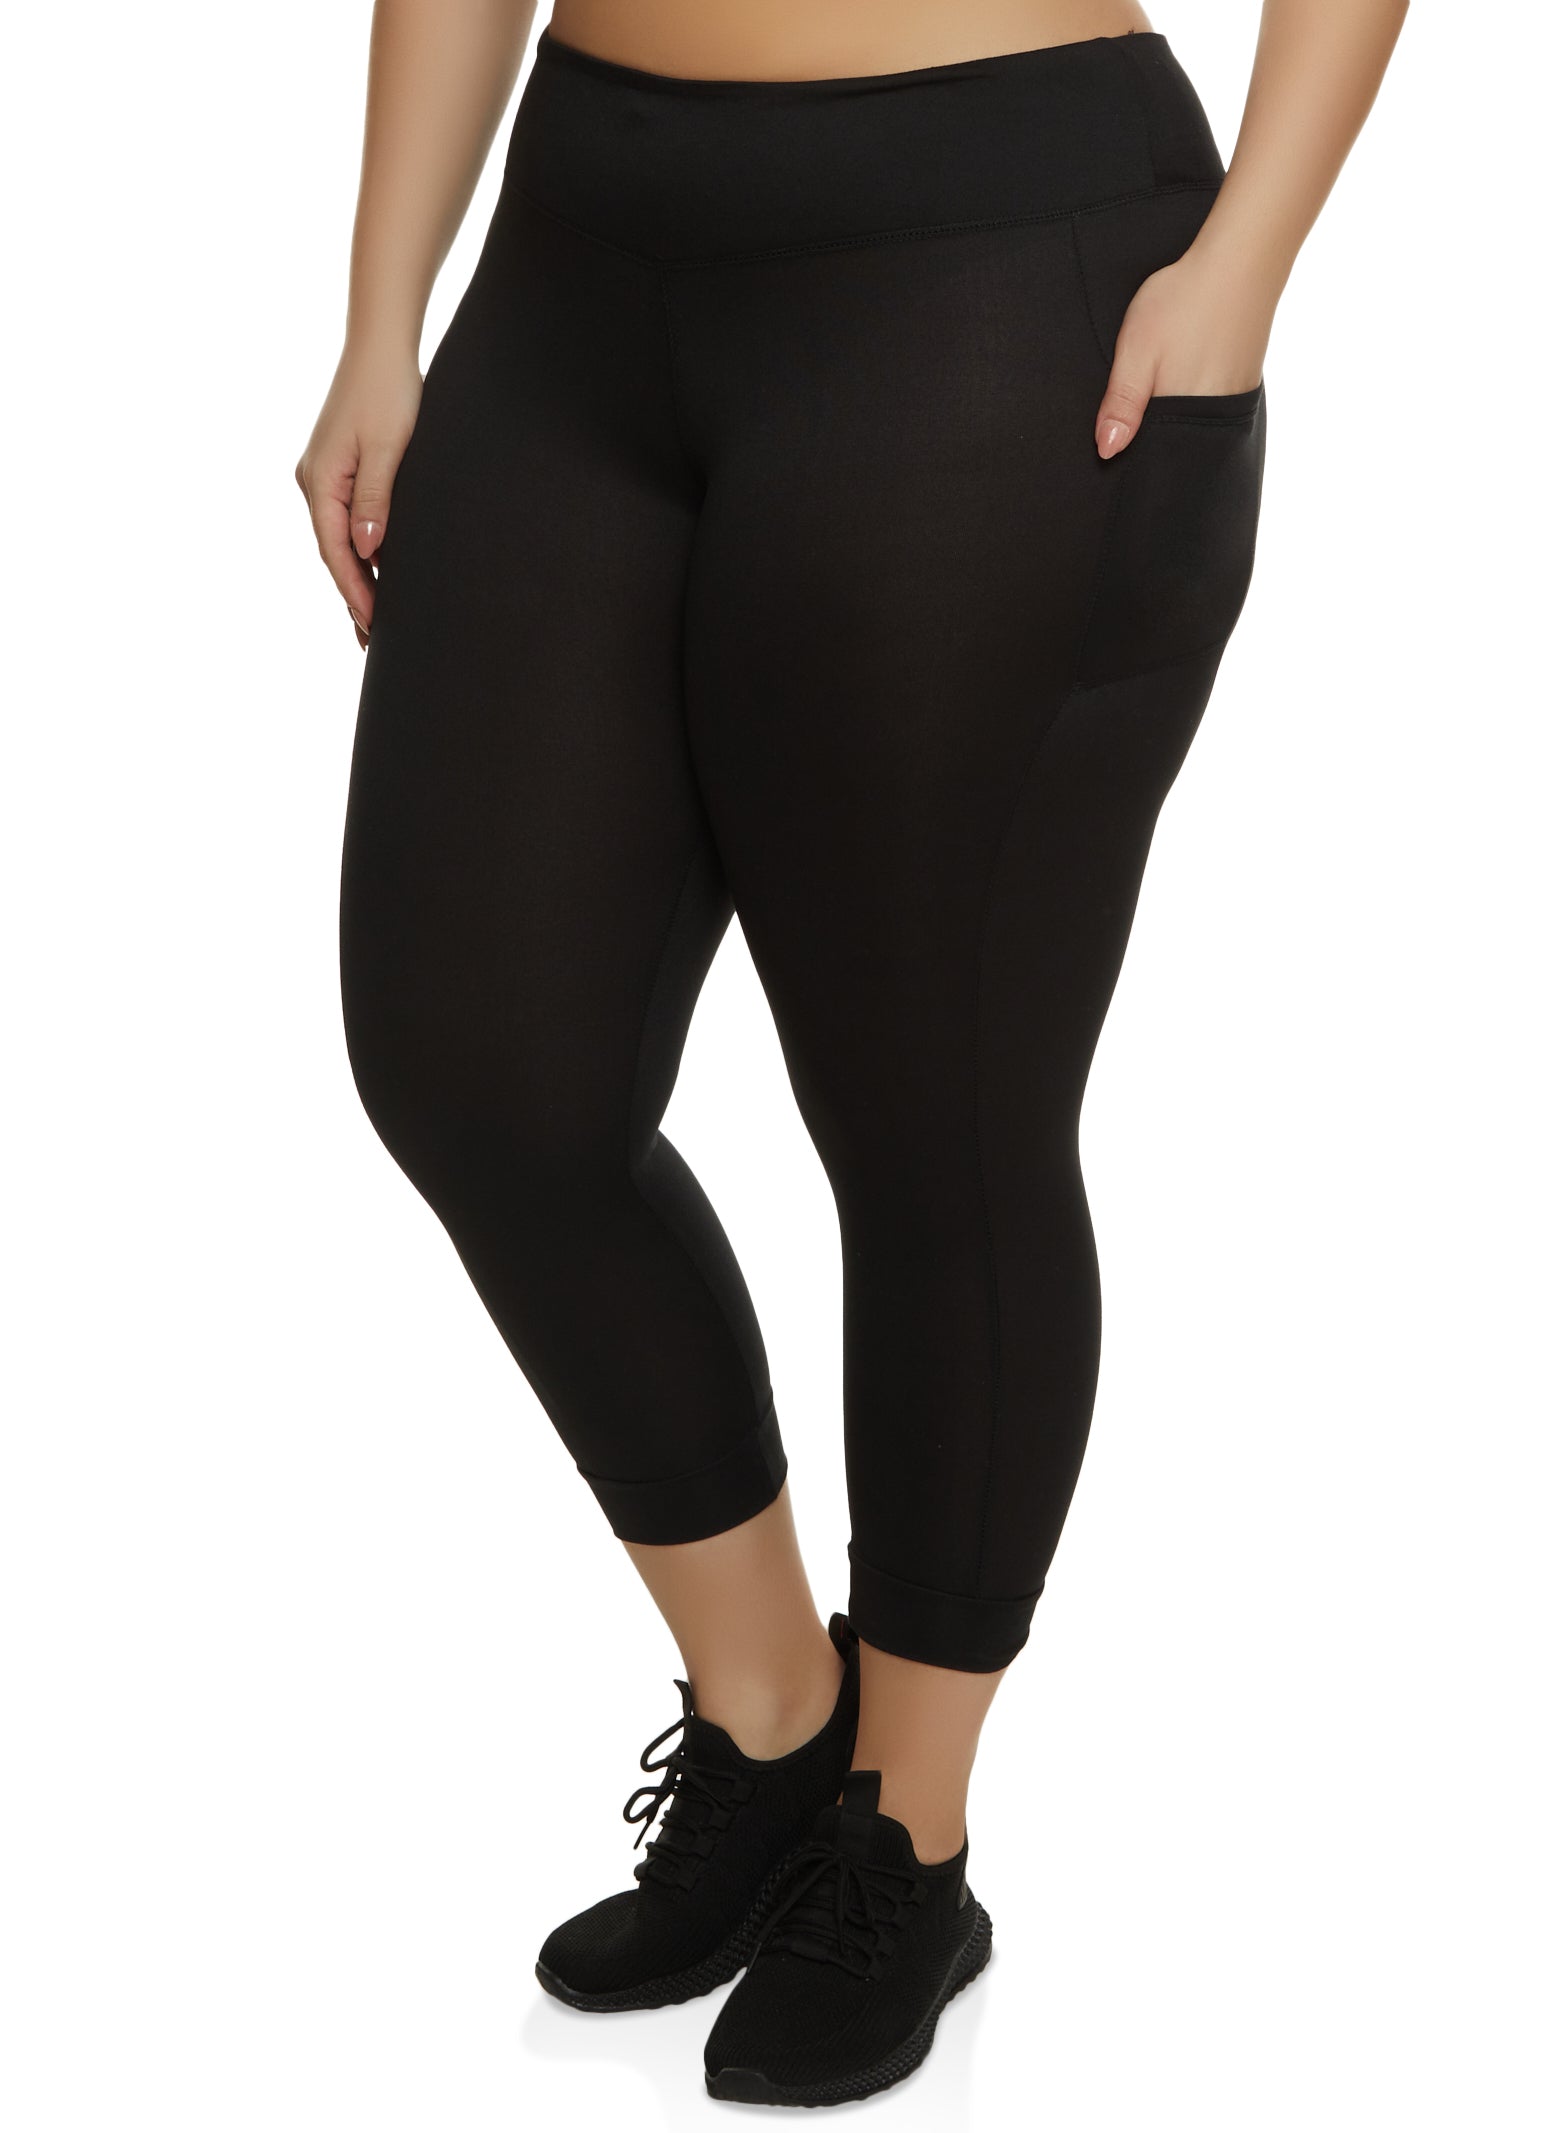 Plus Size Solid High Waist Cell Phone Pocket Leggings - Charcoal